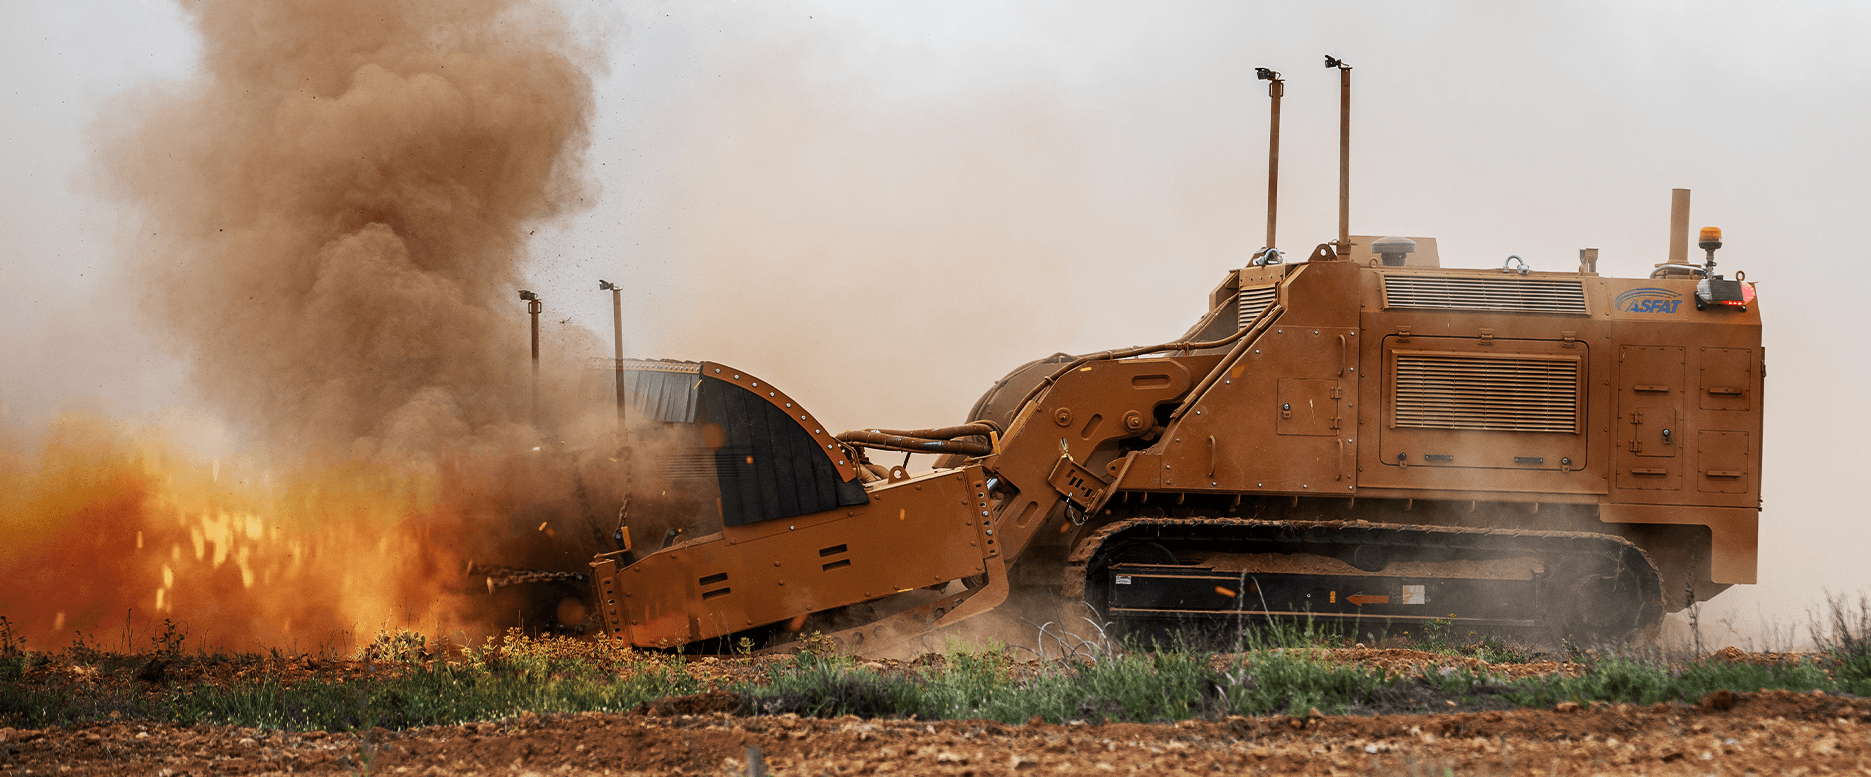 ASFAT Will Produce Mine Clearing Vehicle for Gendarmerie